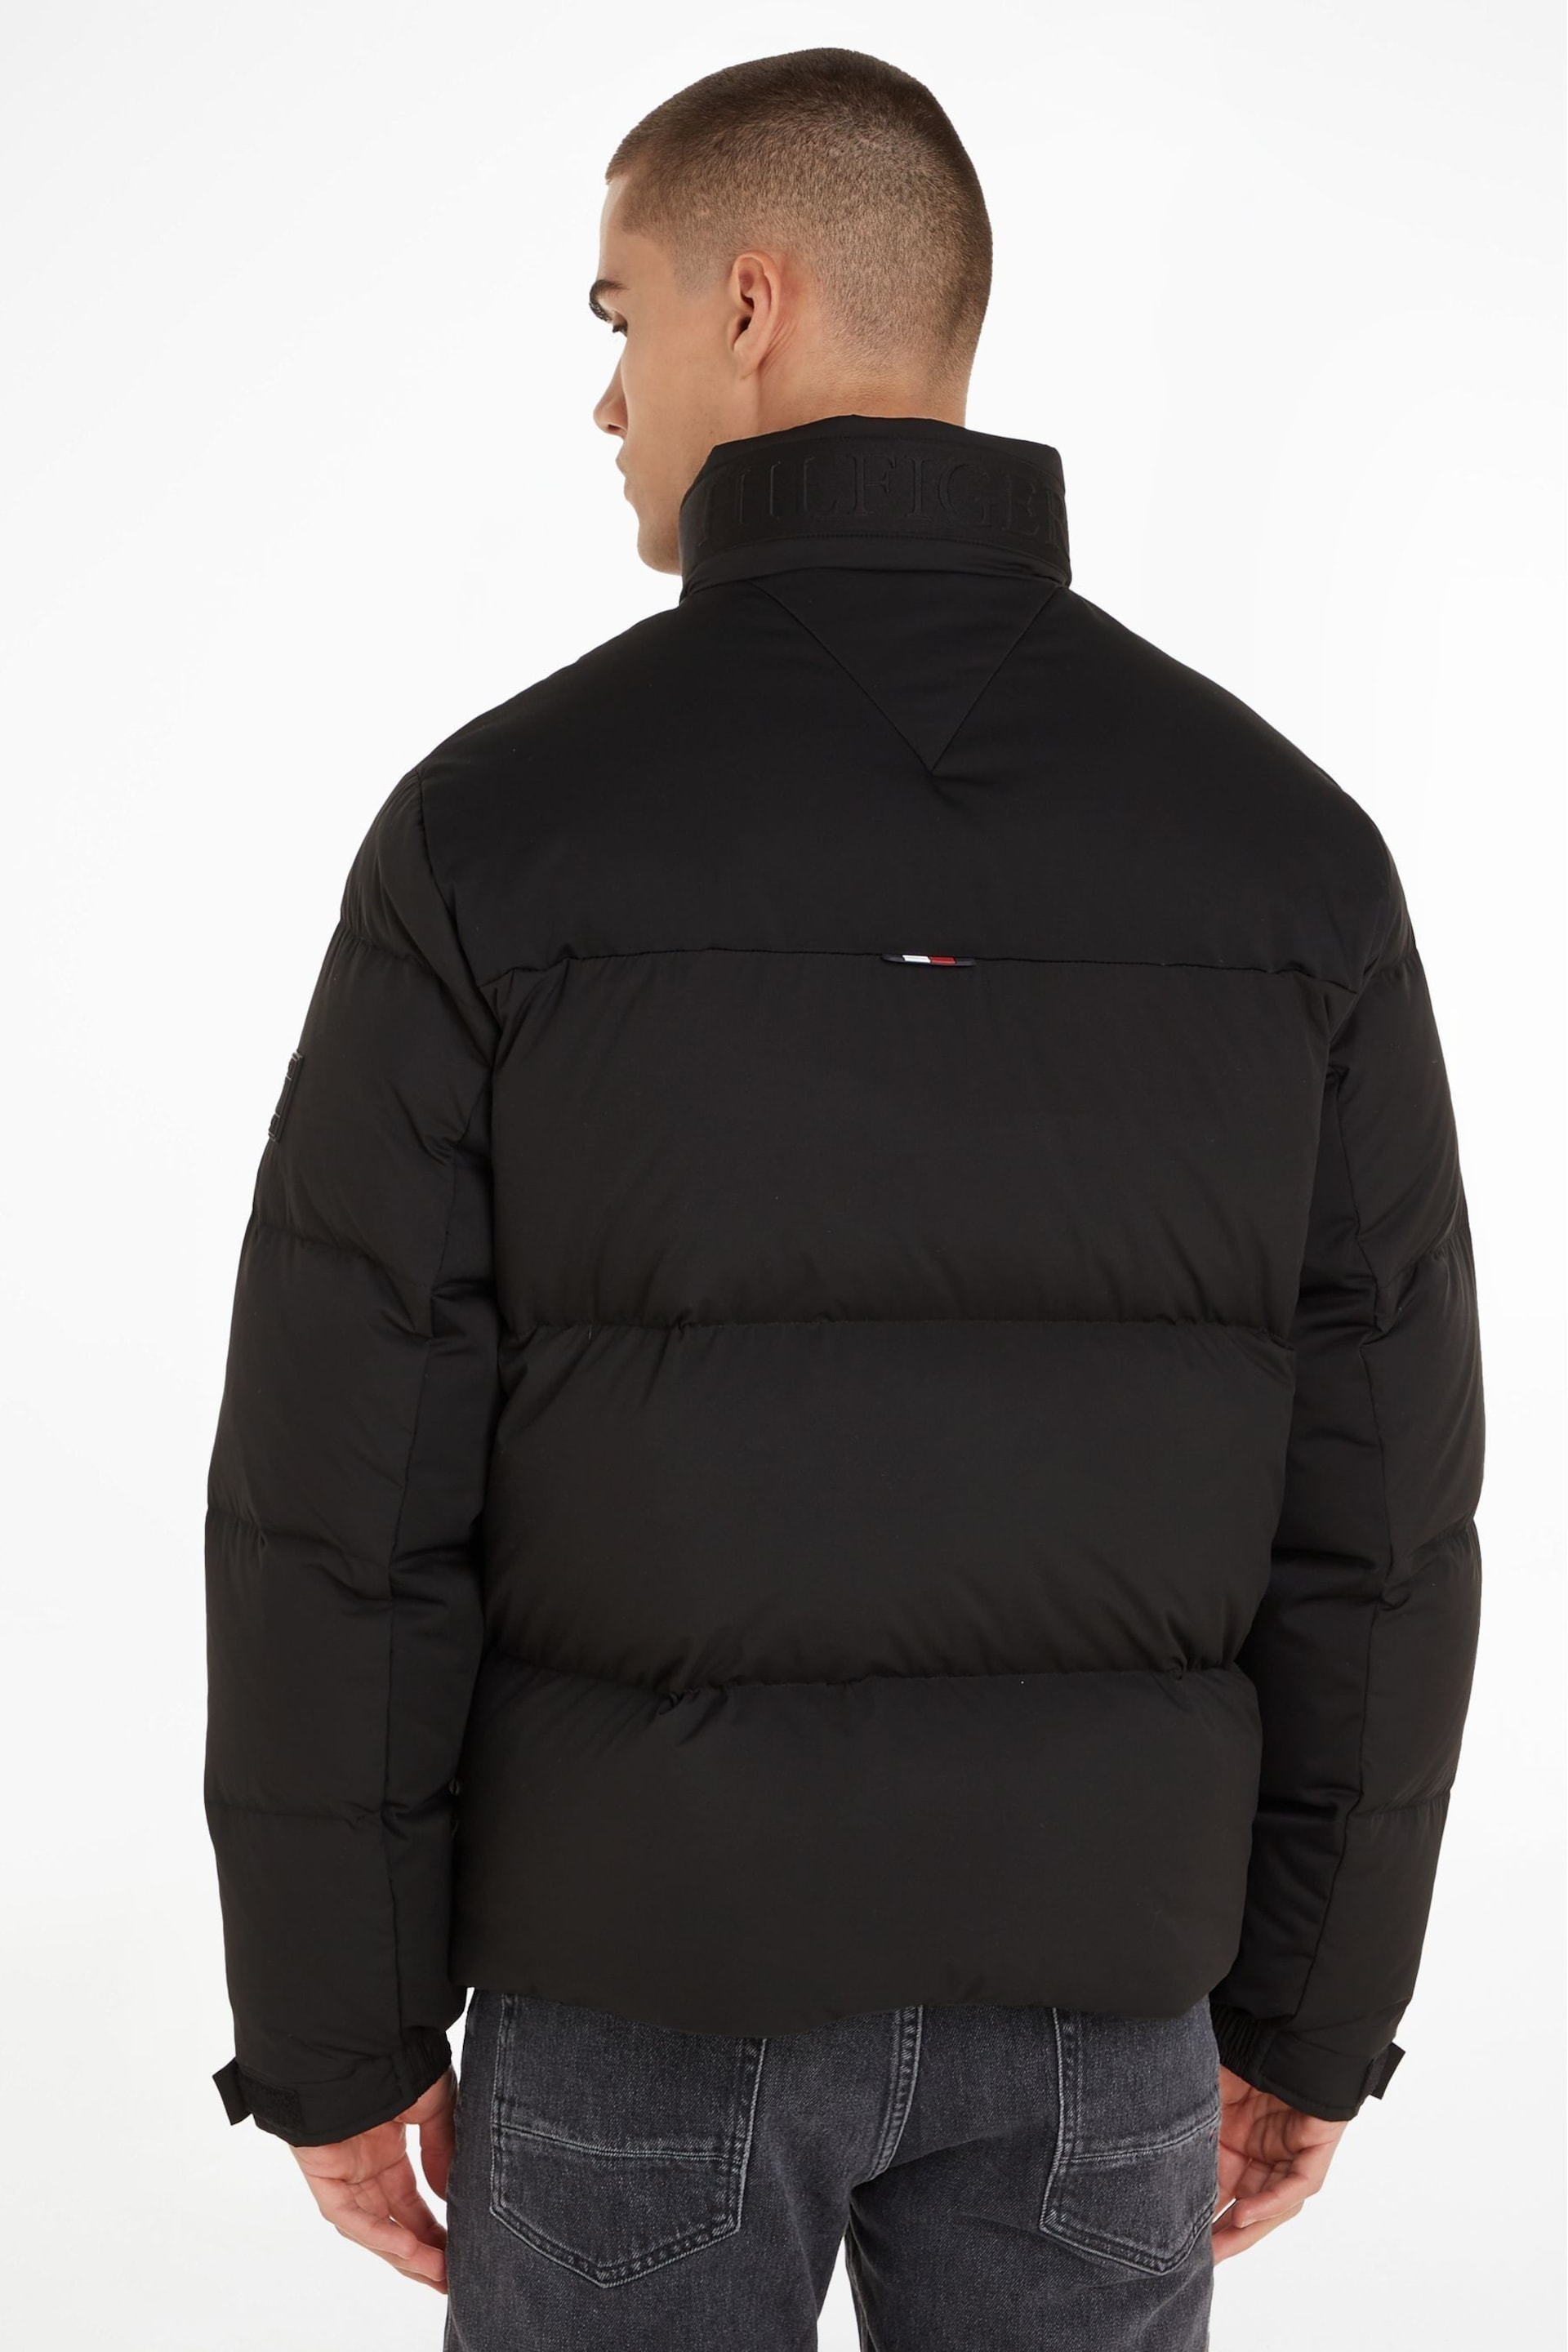 Tommy Hilfiger New York Down Puffer Black Jacket - Image 2 of 4